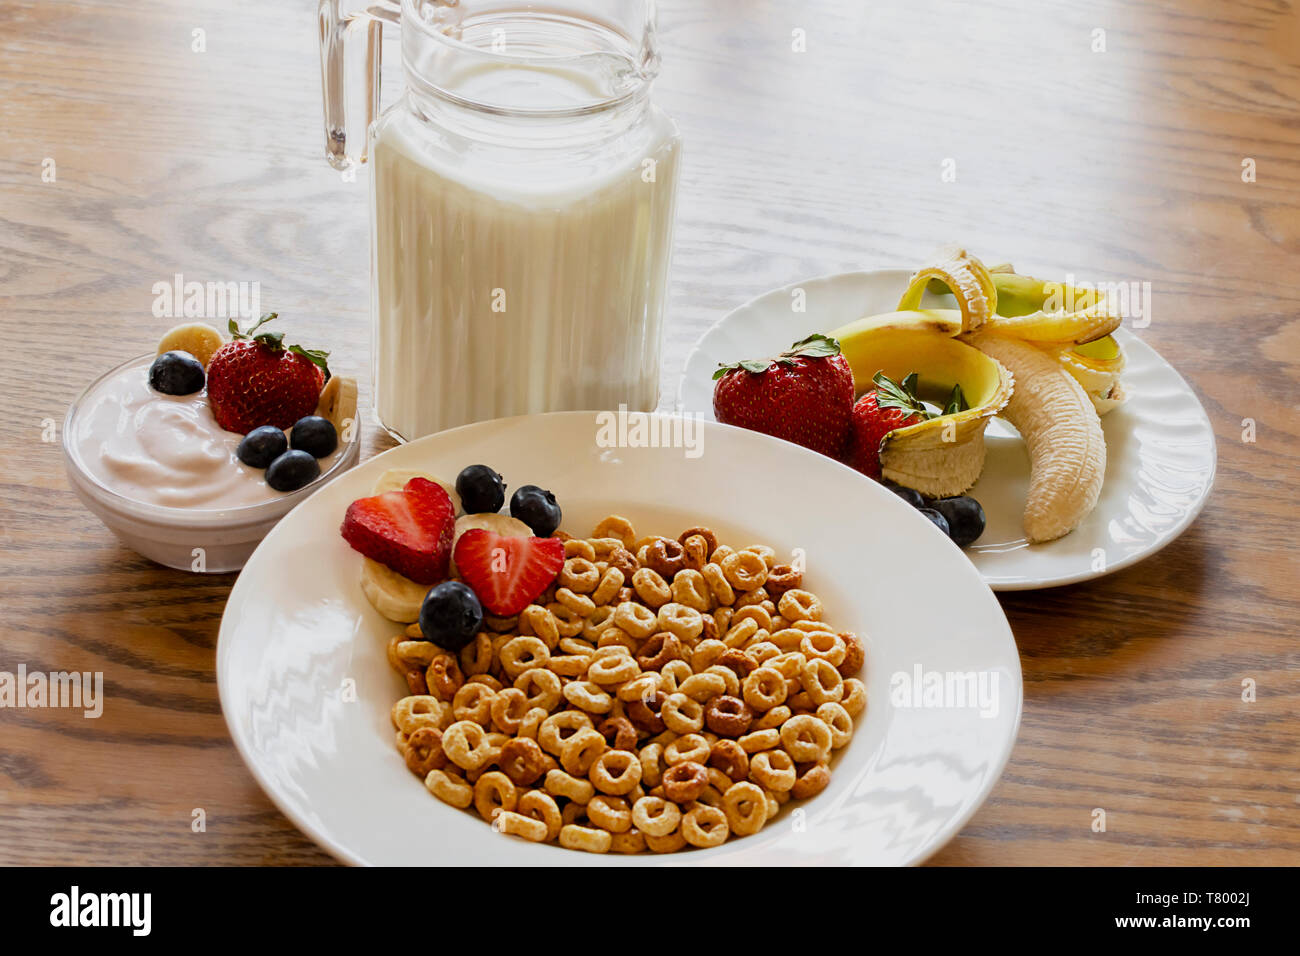 Bowl of oat cereal on a wooden table with yogurt, milk, strawberries, blueberries, and banana. Stock Photo